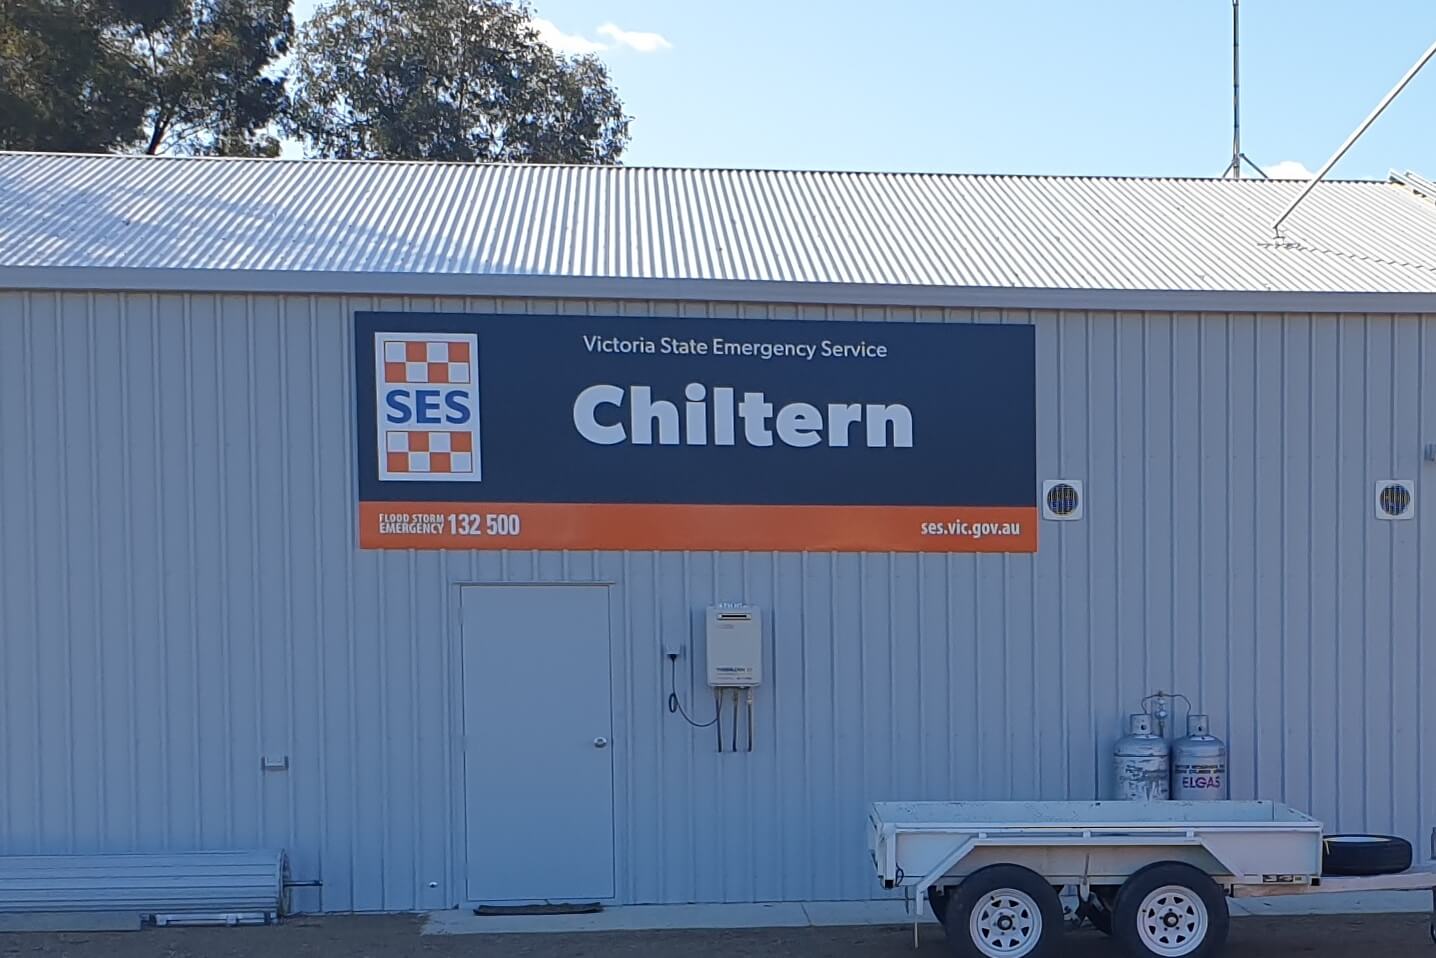 Chiltern SES outdoor building sign